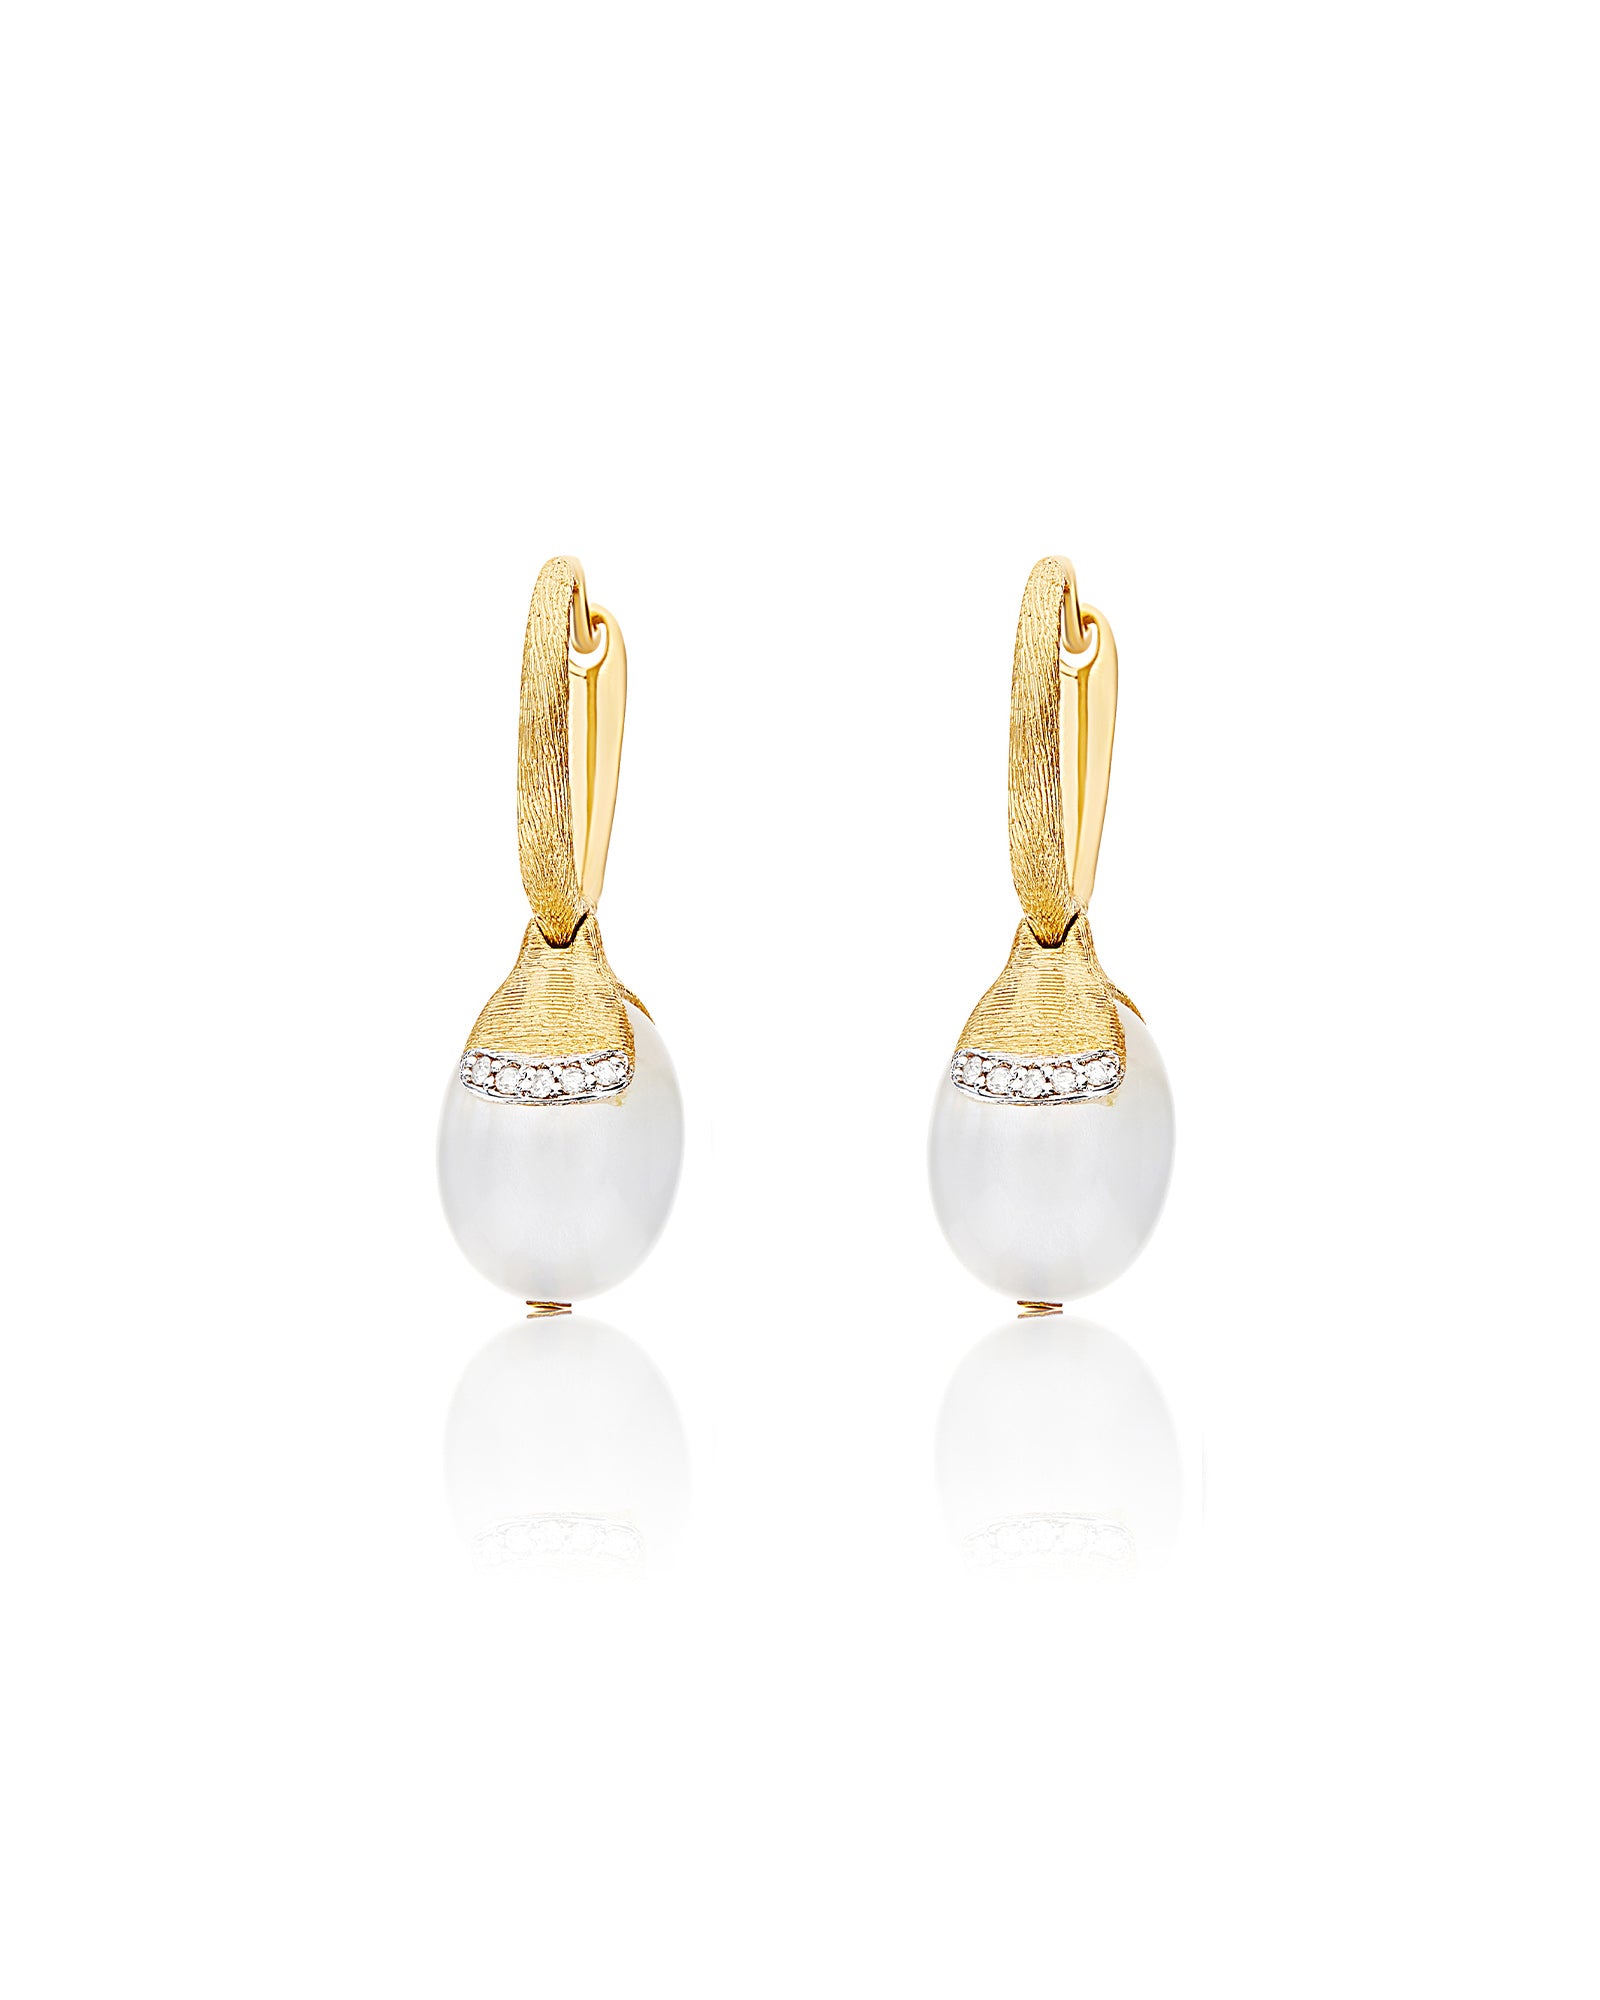 White Desert "Amulets" Ciliegine Gold and White Moonstone Ball Drop Earrings with Diamonds Details (SMALL)